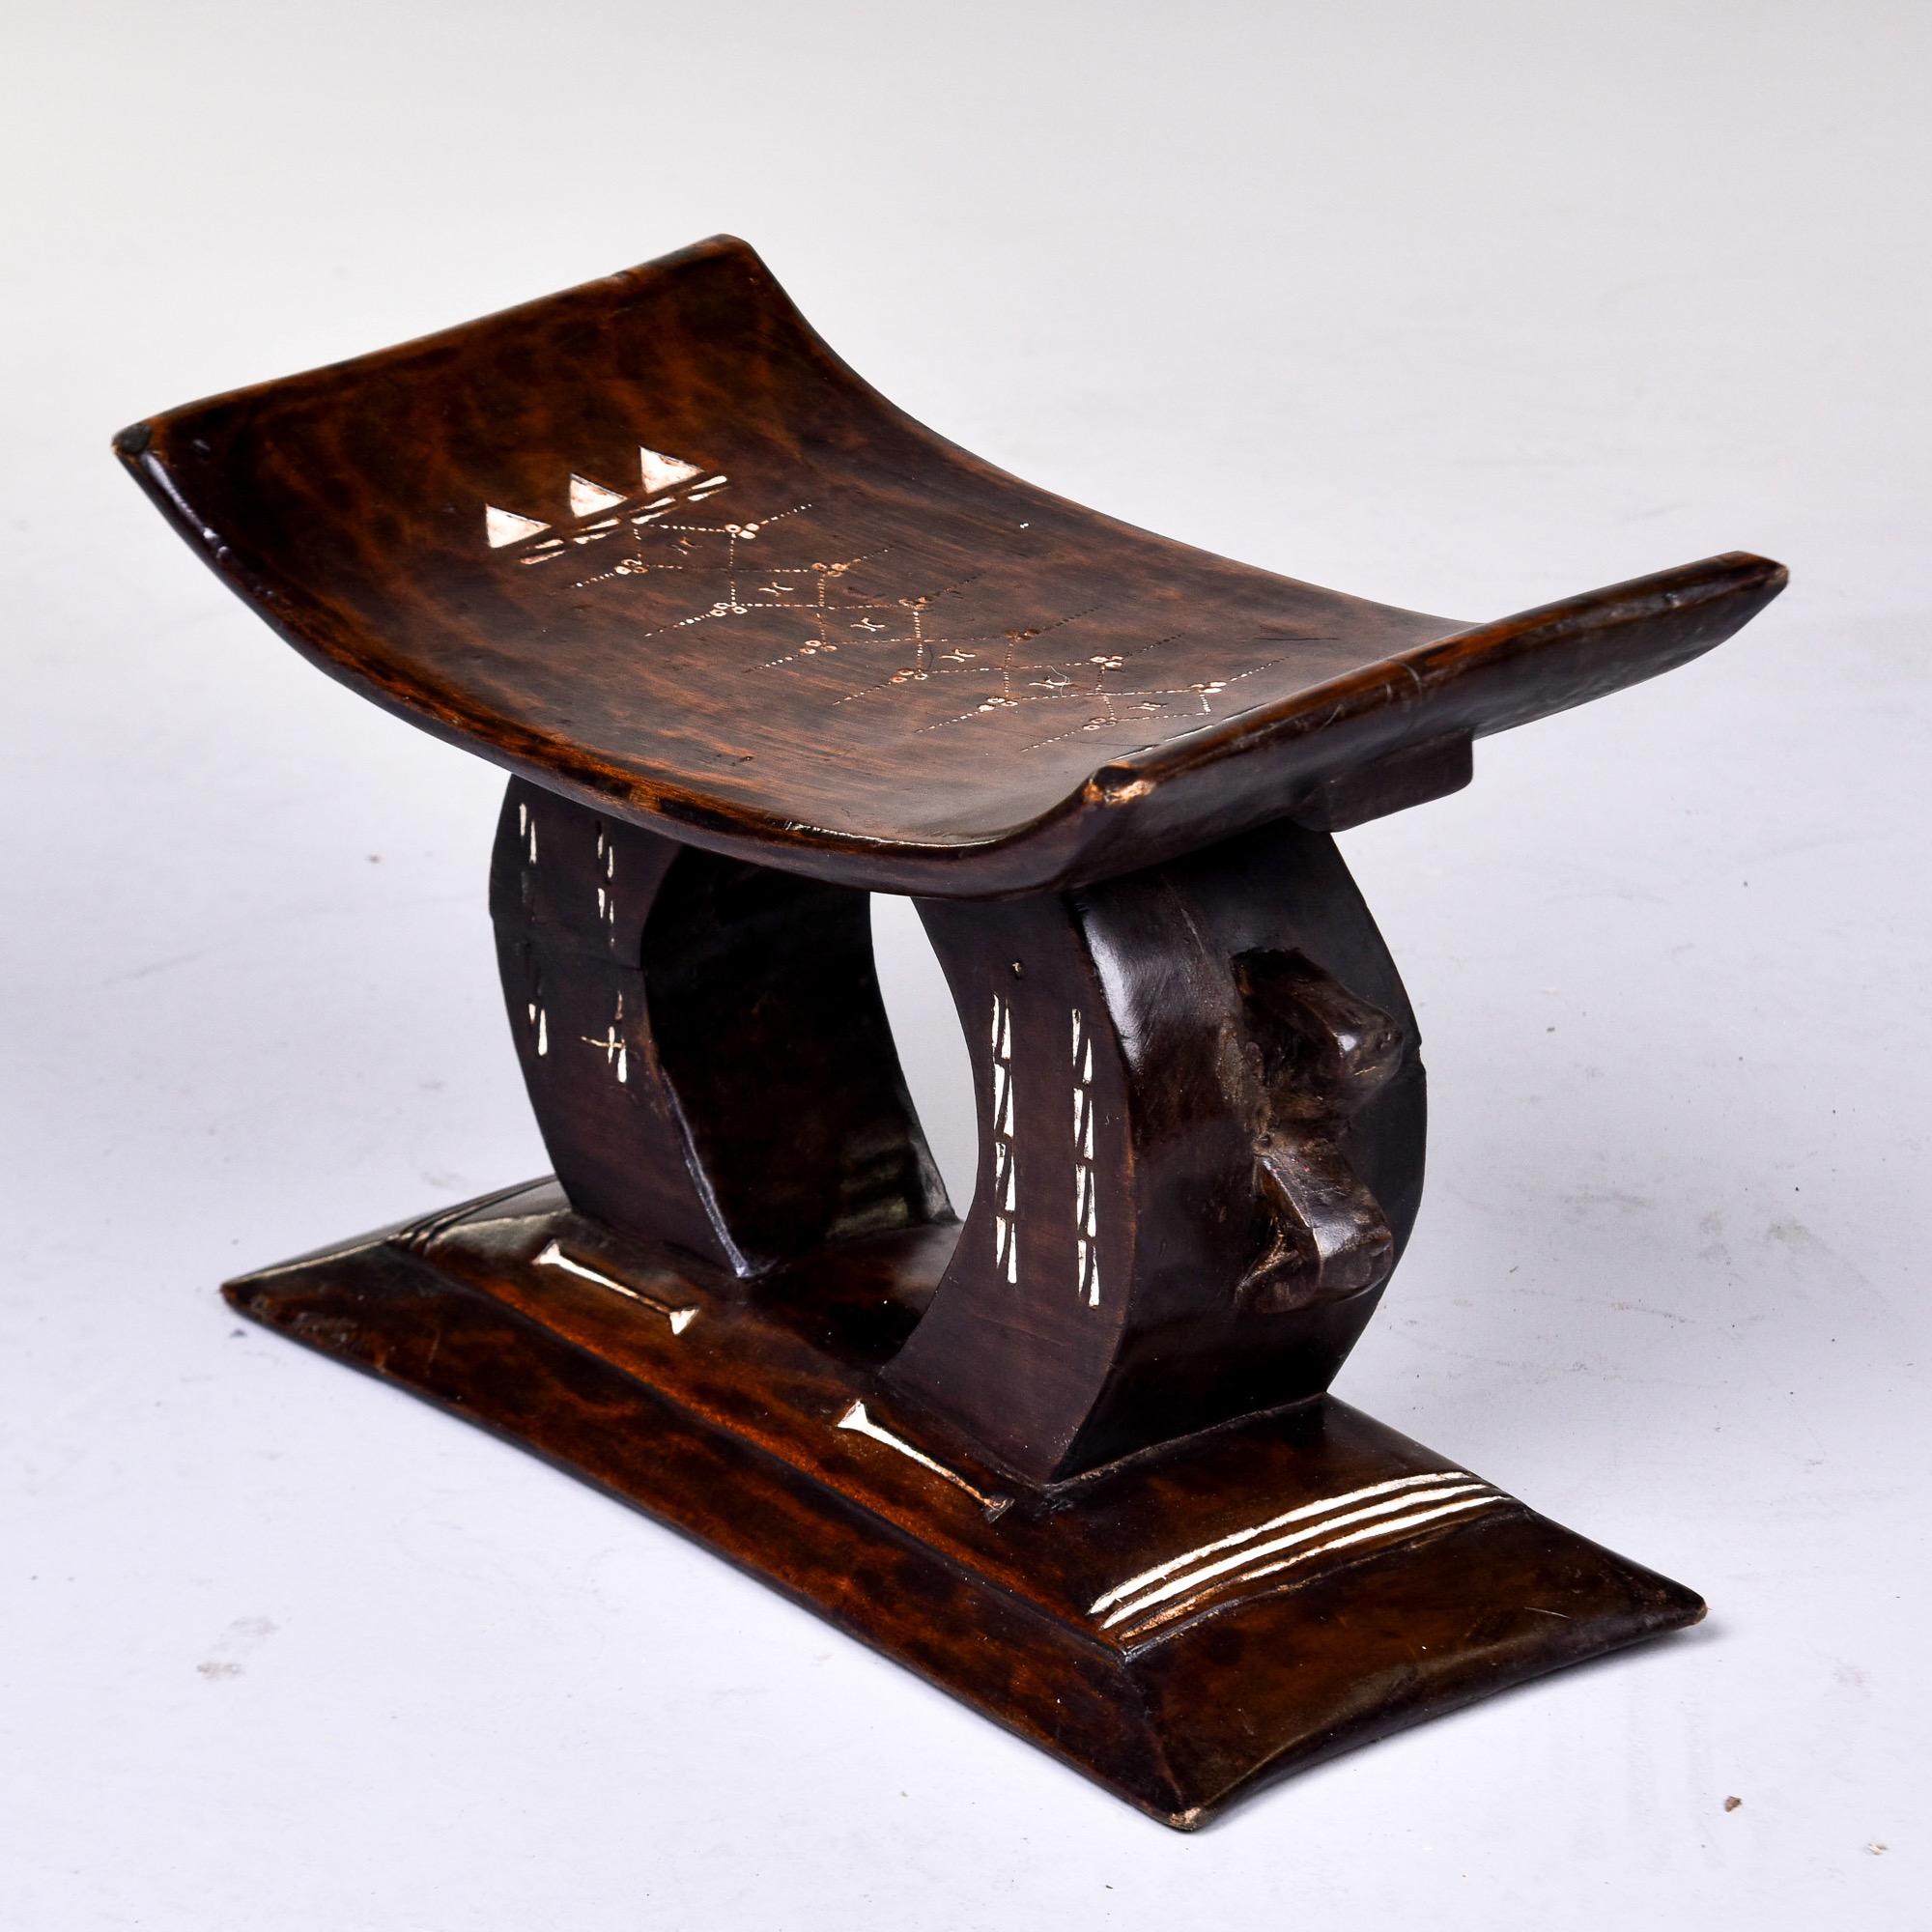 Ghanaian Vintage Carved African Stool by the Ashanti of Ghana